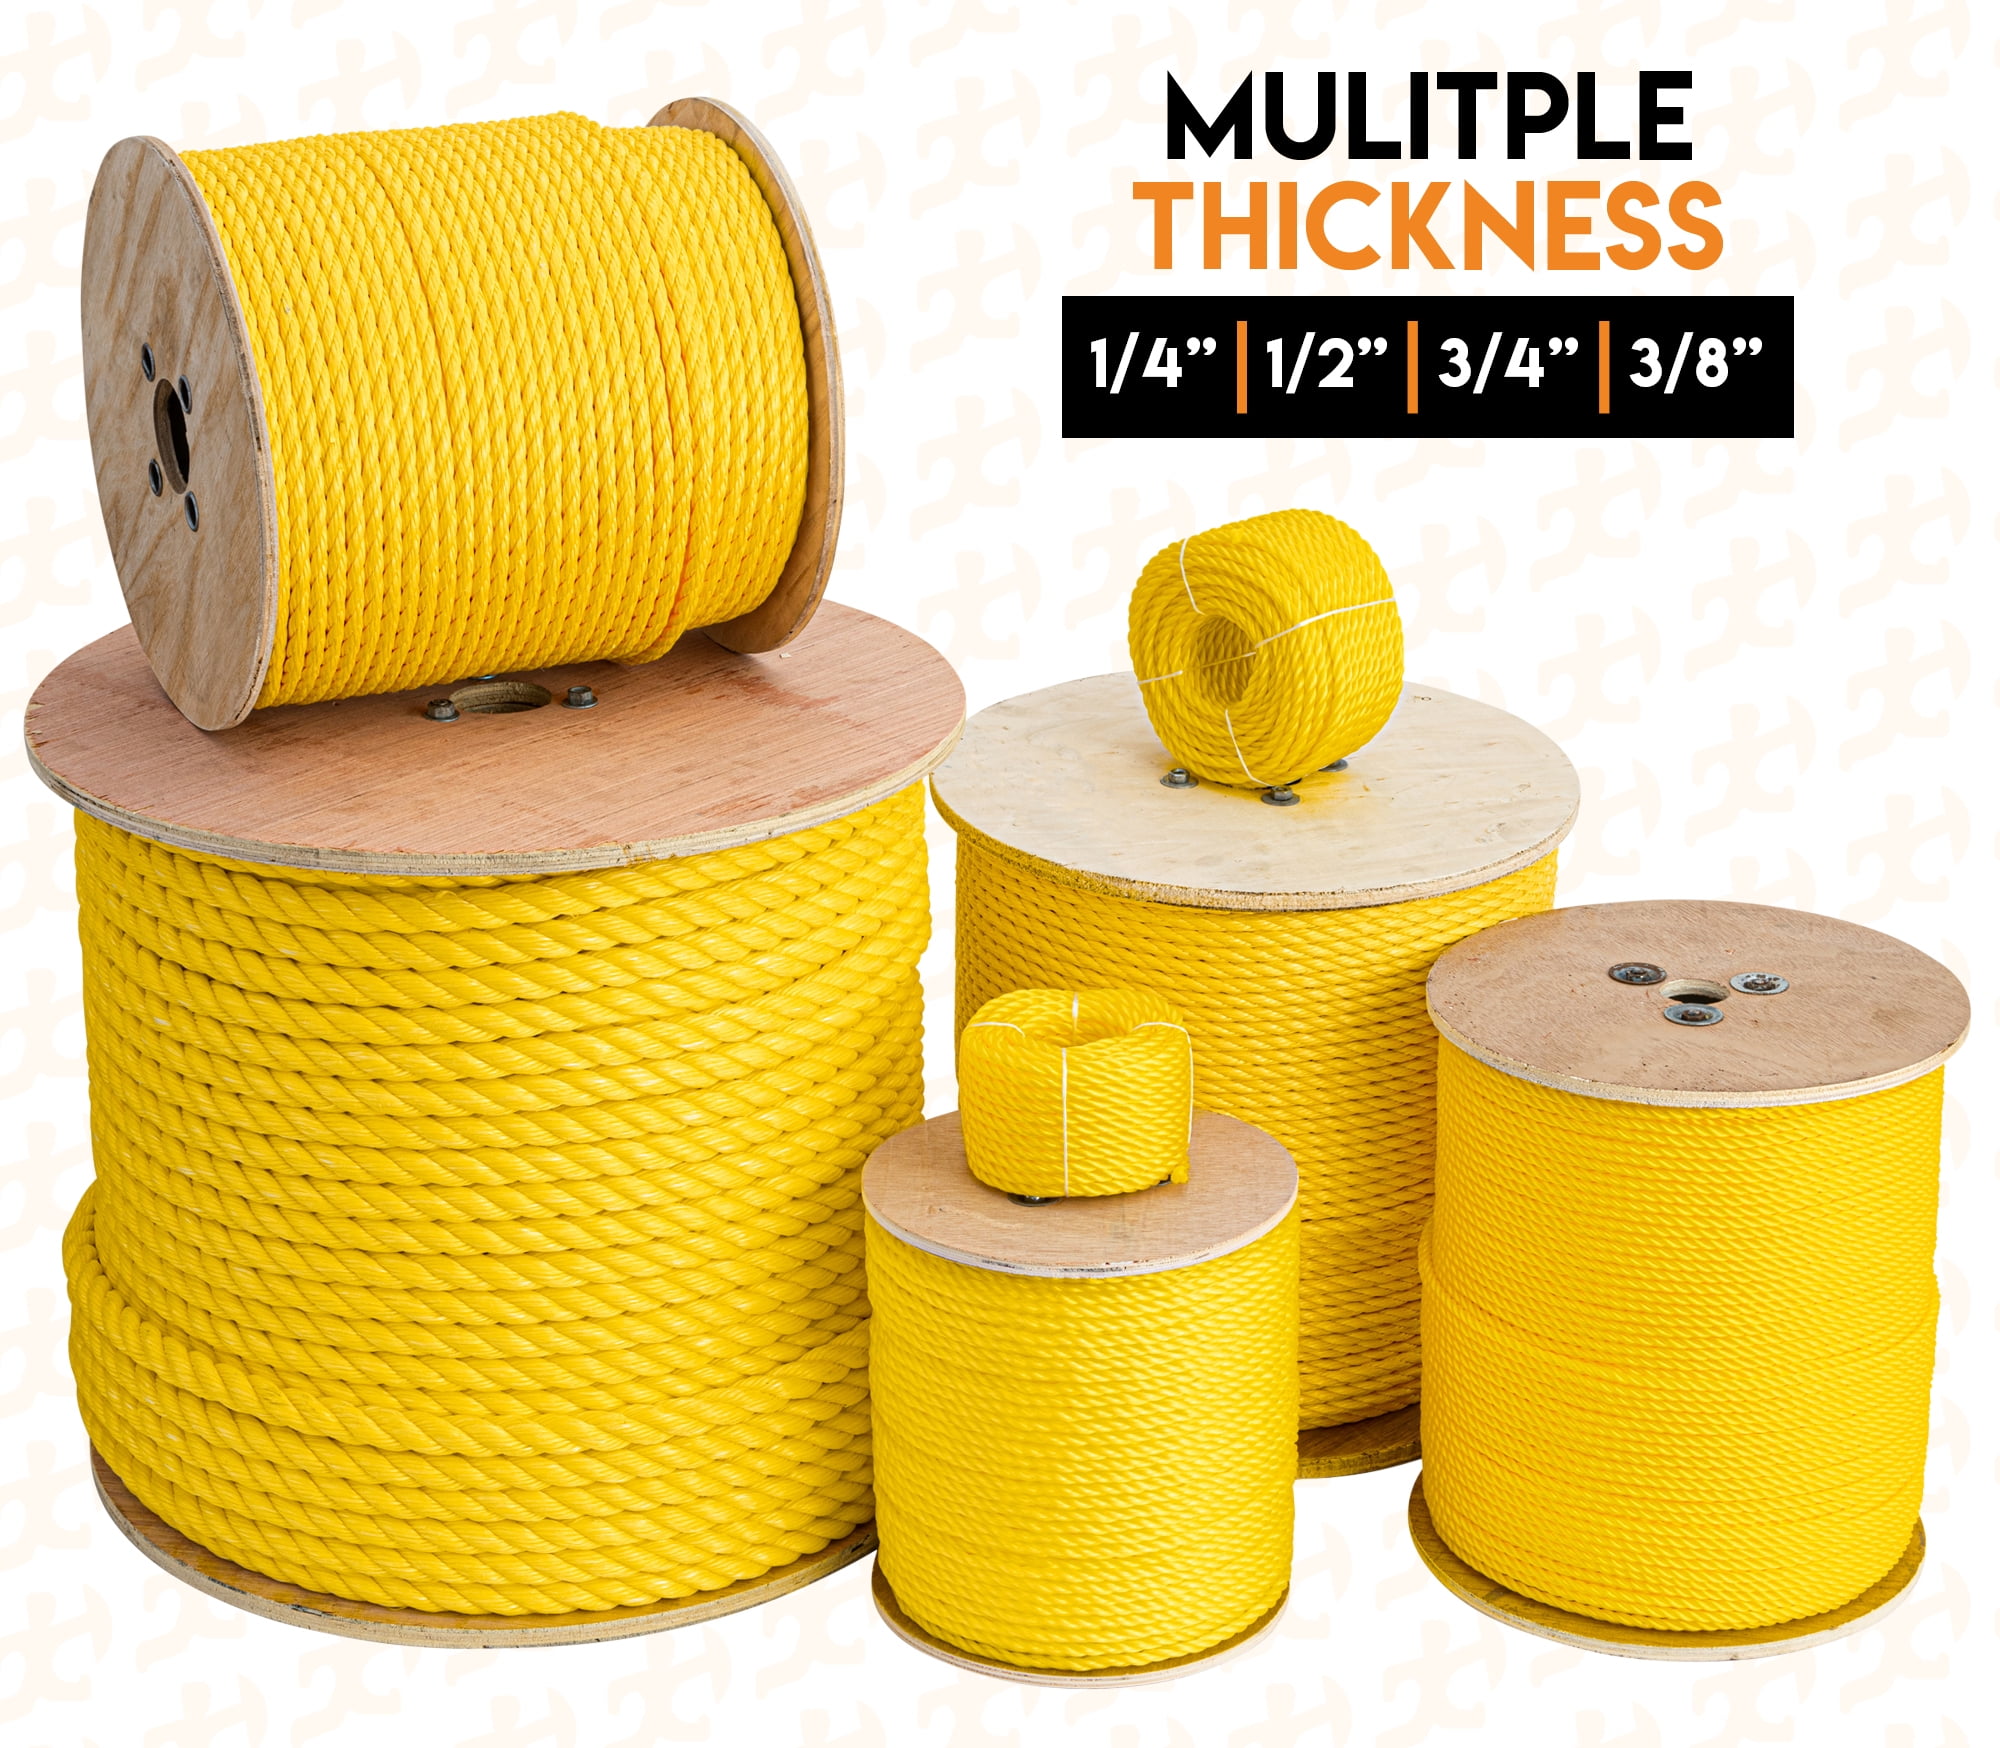 100 ft Twisted Polypropylene Rope - 1/4 - Yellow Floating Poly Pro Cord -  Resistant to Oil, Moisture, Rot, Mold, Marine Growth and Chemicals -  Reduced Slip, Easy Knot, Flexible - by Xpose Safety 